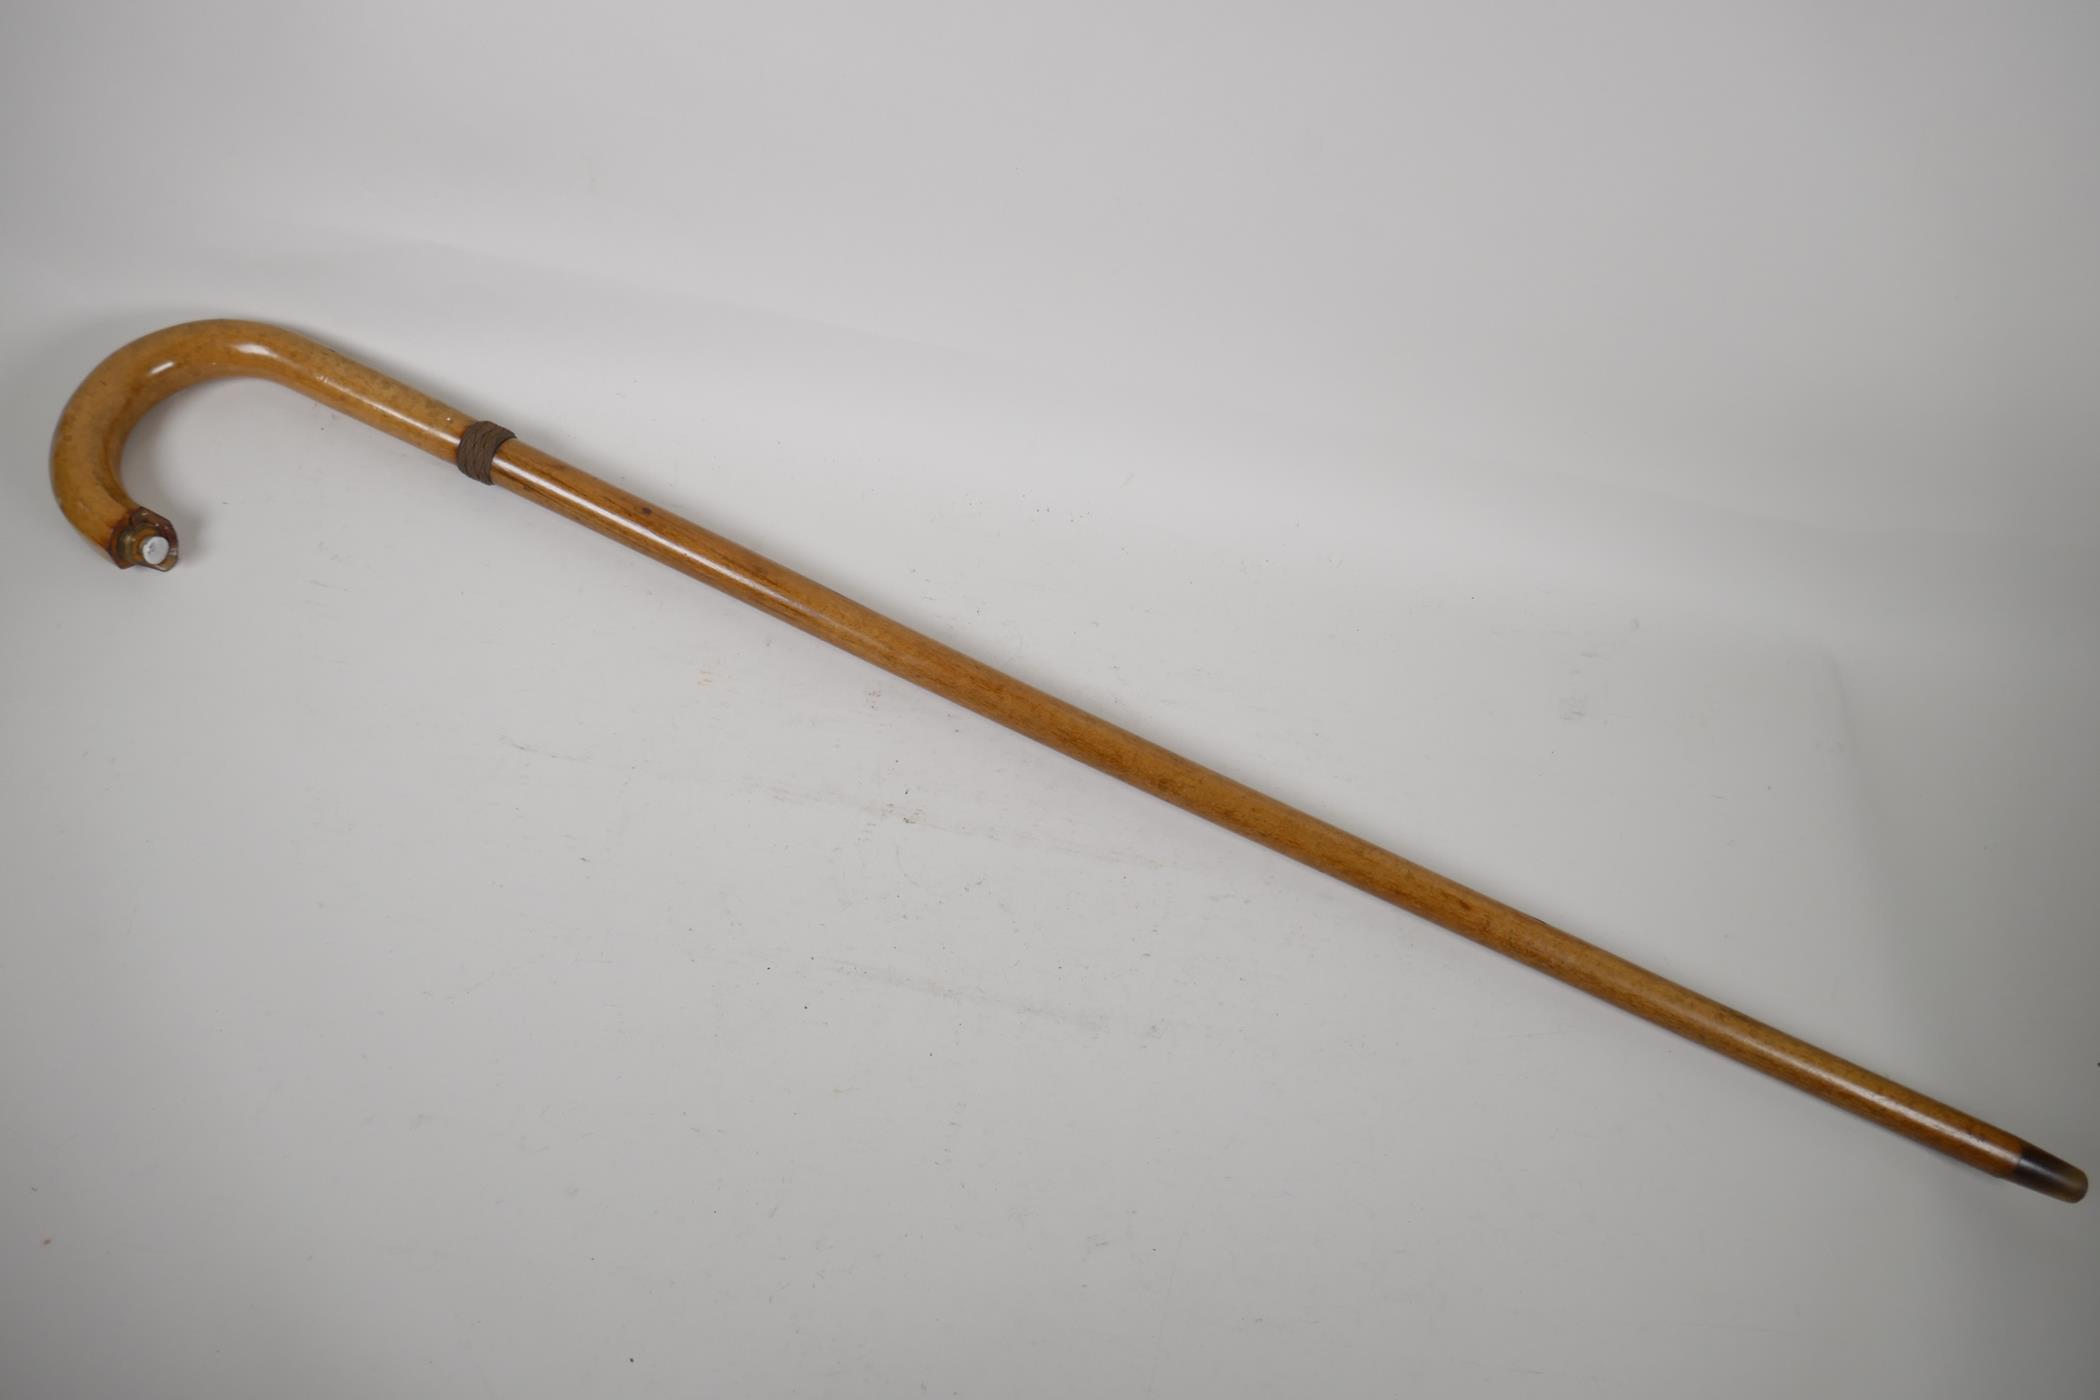 A spiral decorated walking stick, with bone handle. 37" long